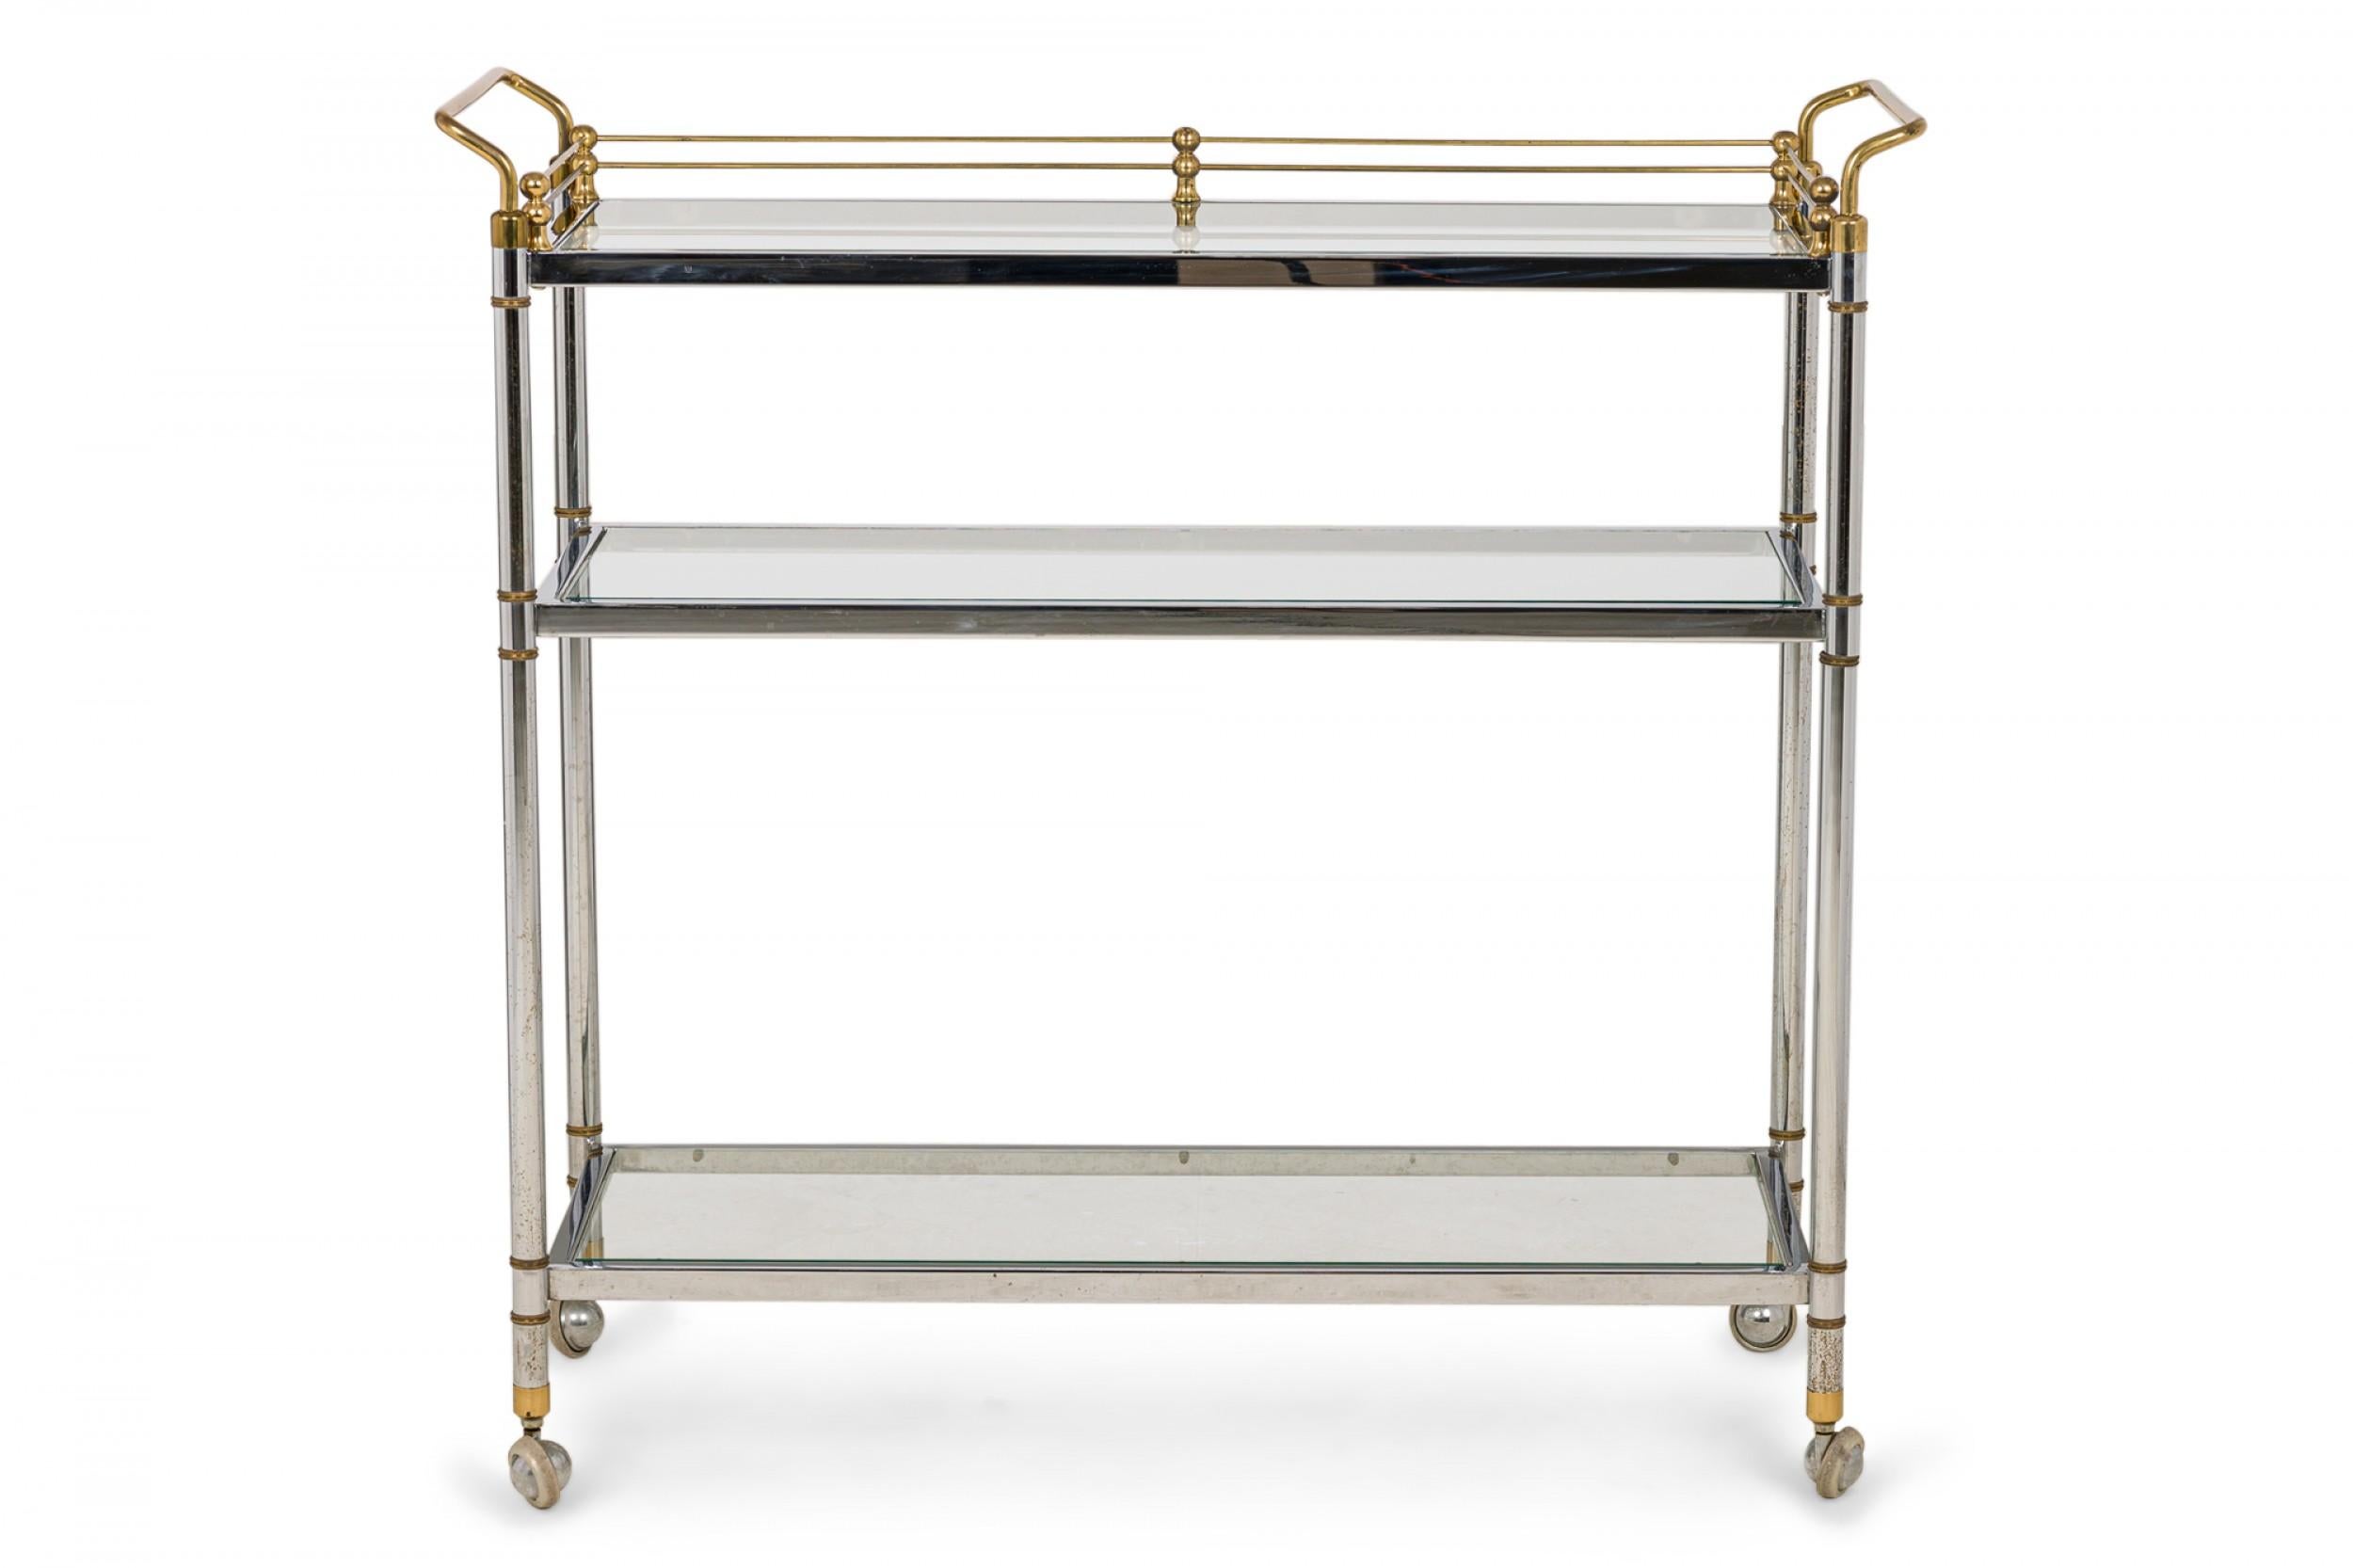 Hollywood Regency High Style Mid-Century 3-tier serving trolley with a rectangular chrome and brass frame with clear glass shelves, resting on four casters.
 